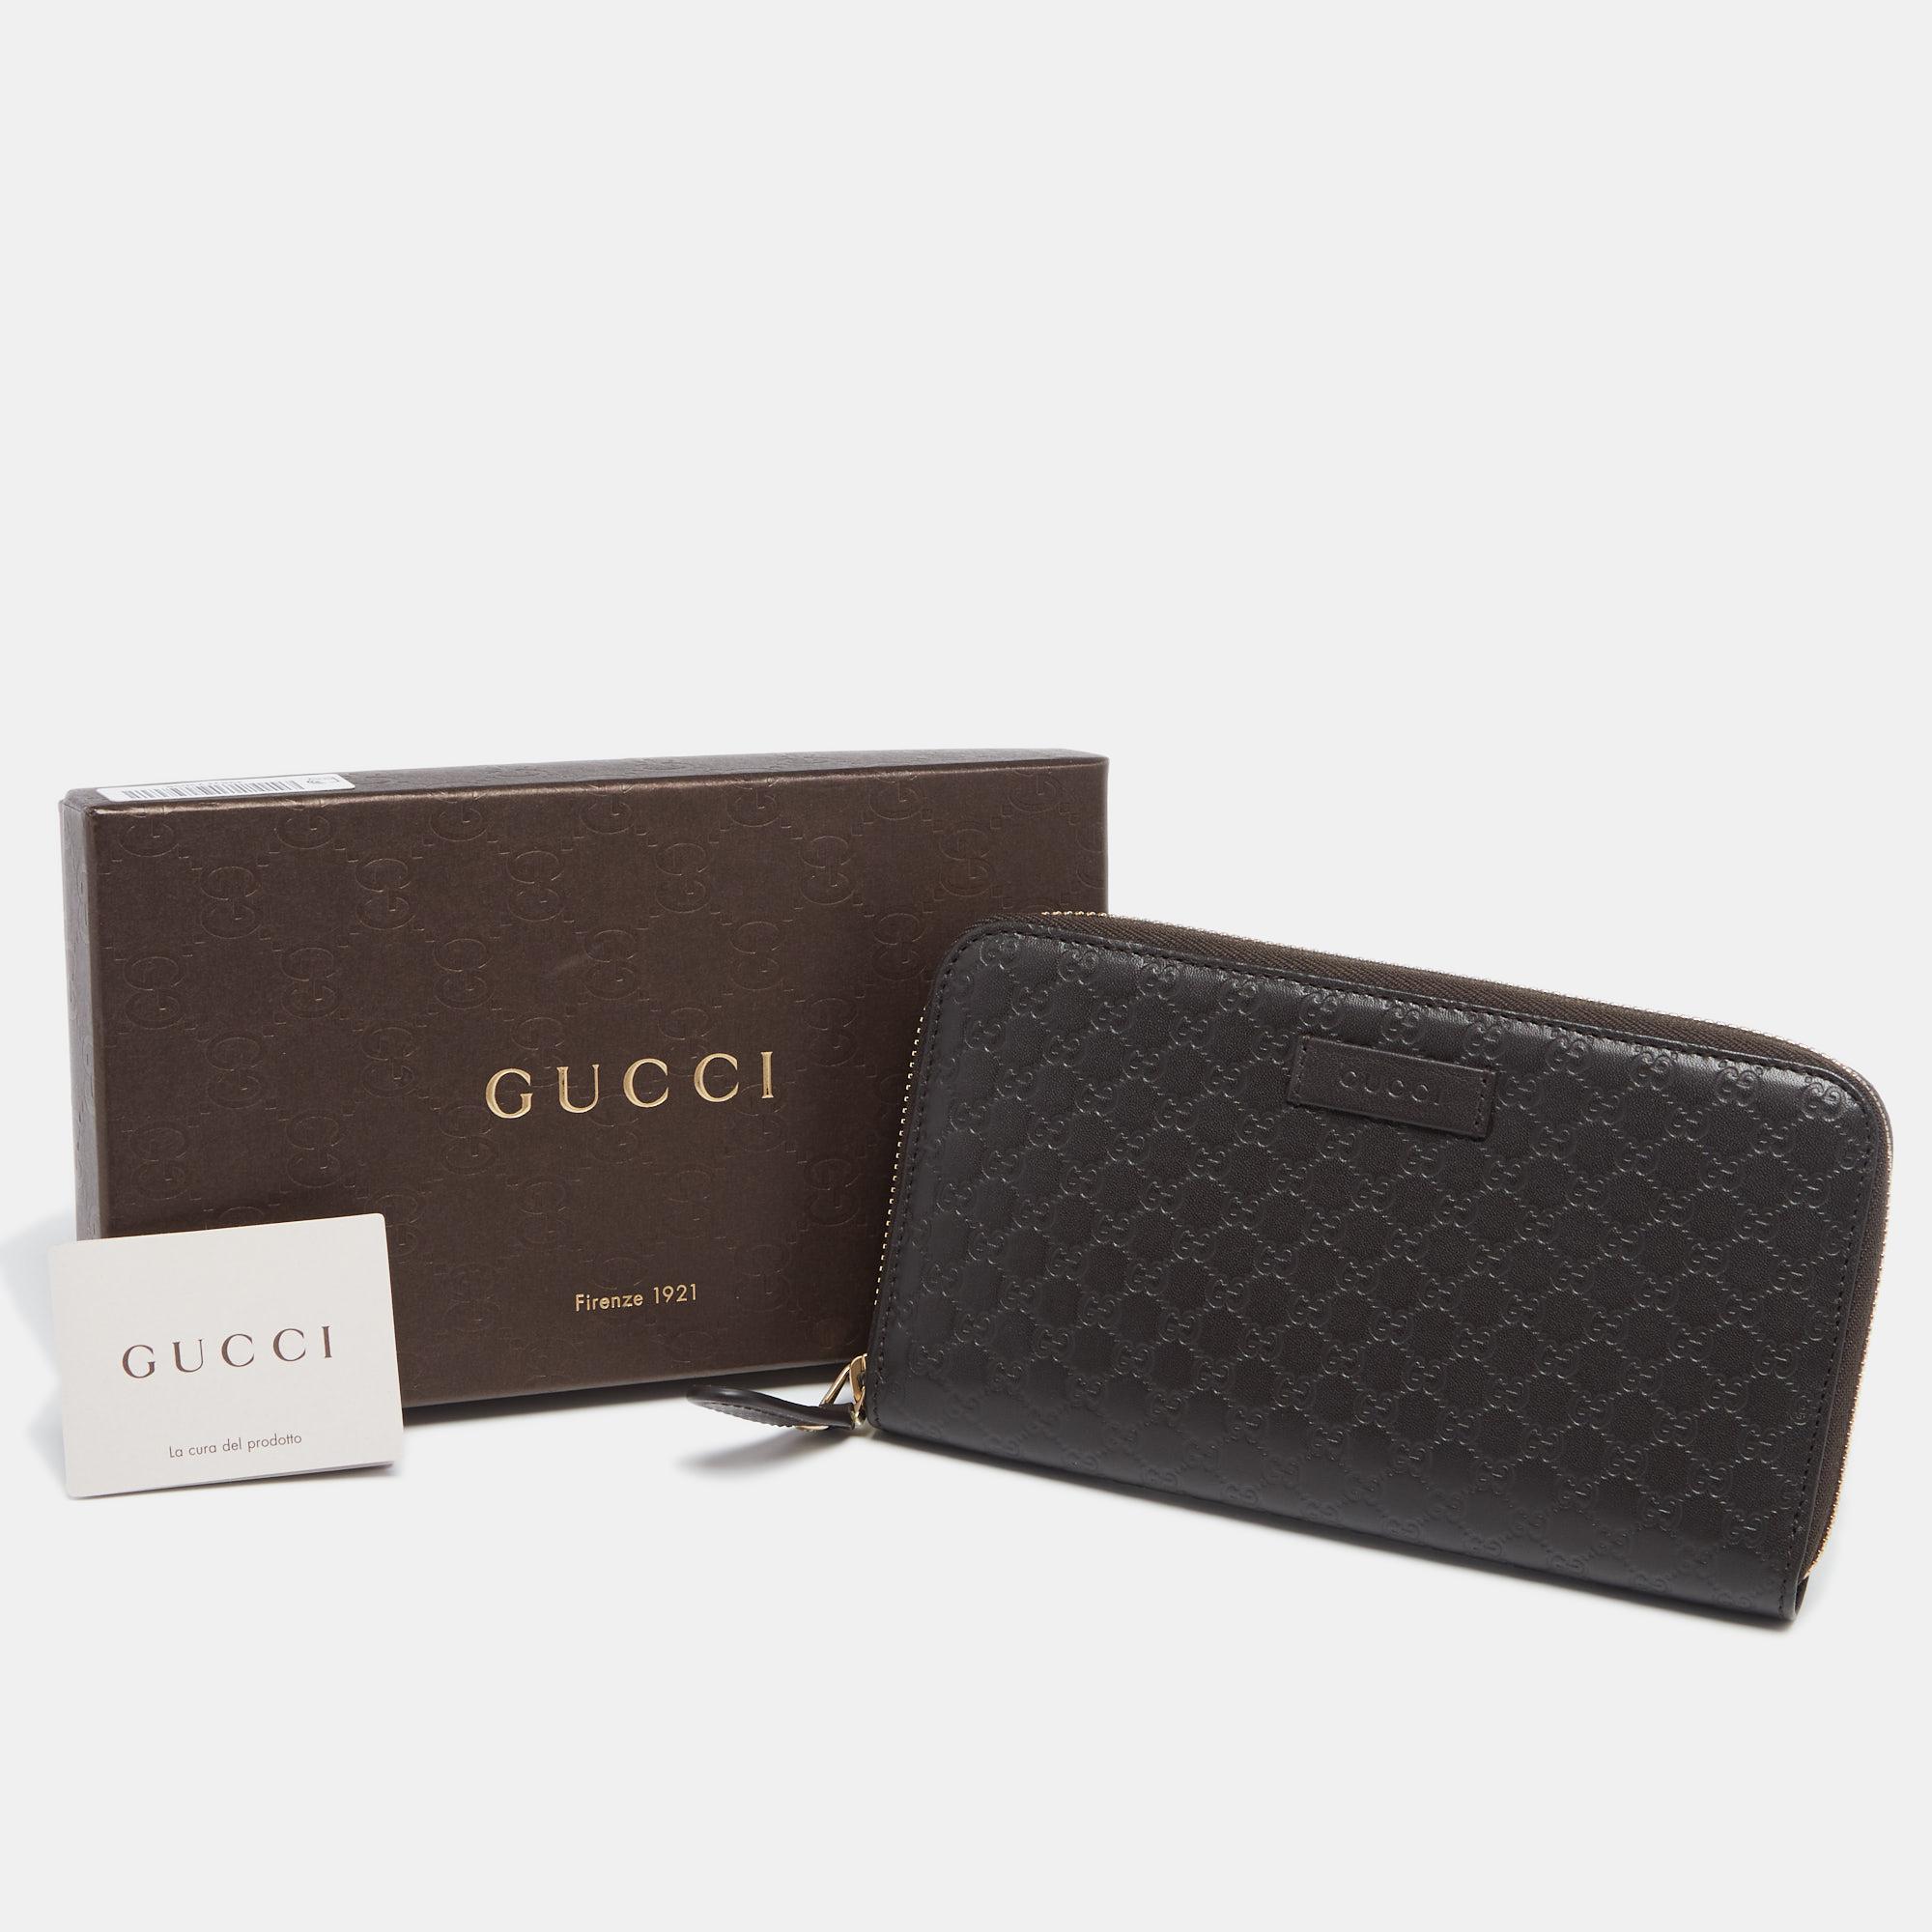 Gucci Brown Microguccissima Leather Zip Around Wallet 6